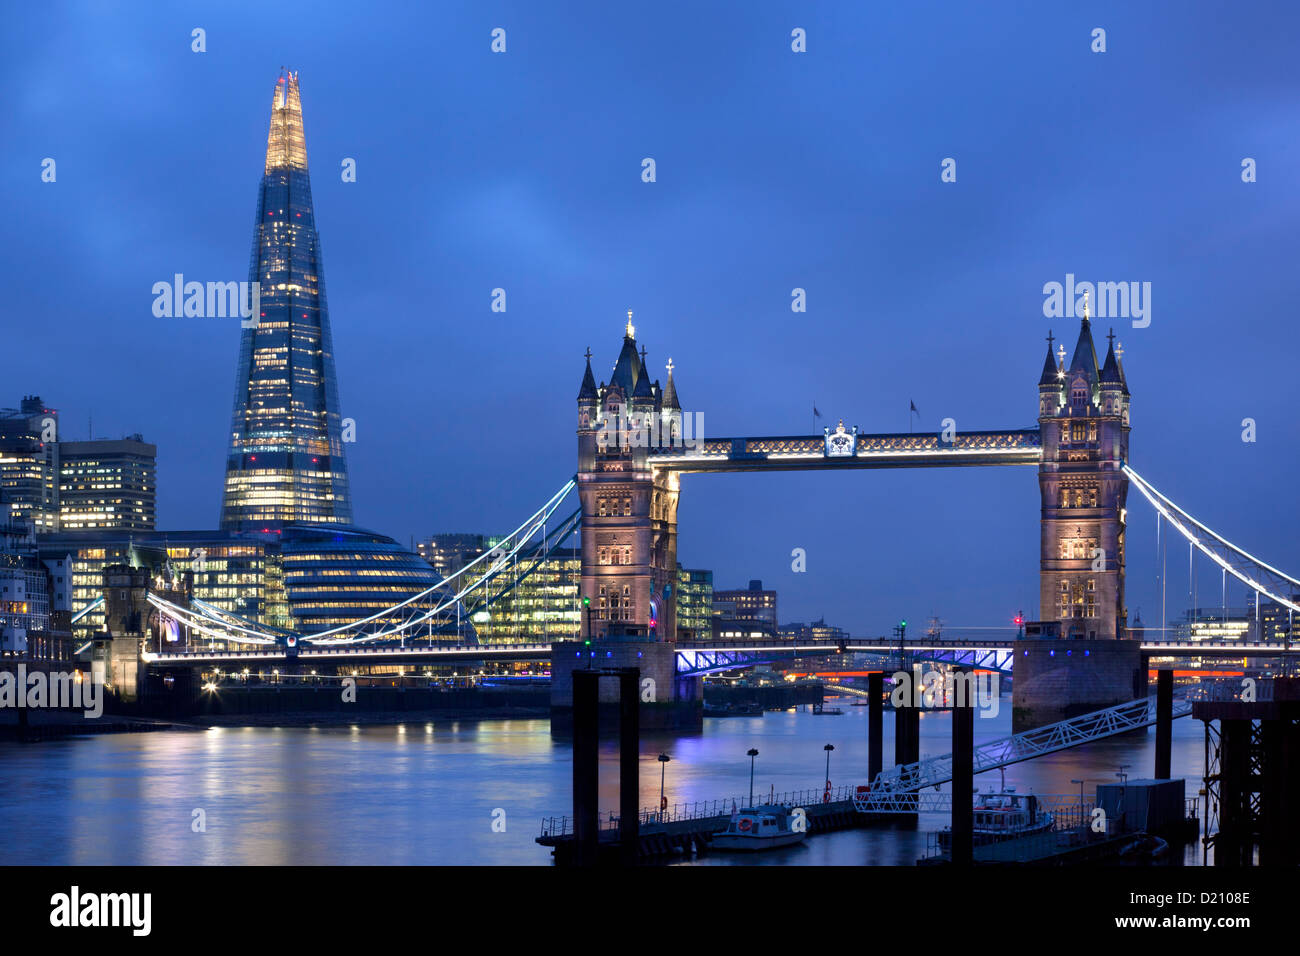 View along river Thames with Tower Bridge and new Shard Building at night, London, England, Europe. Stock Photo